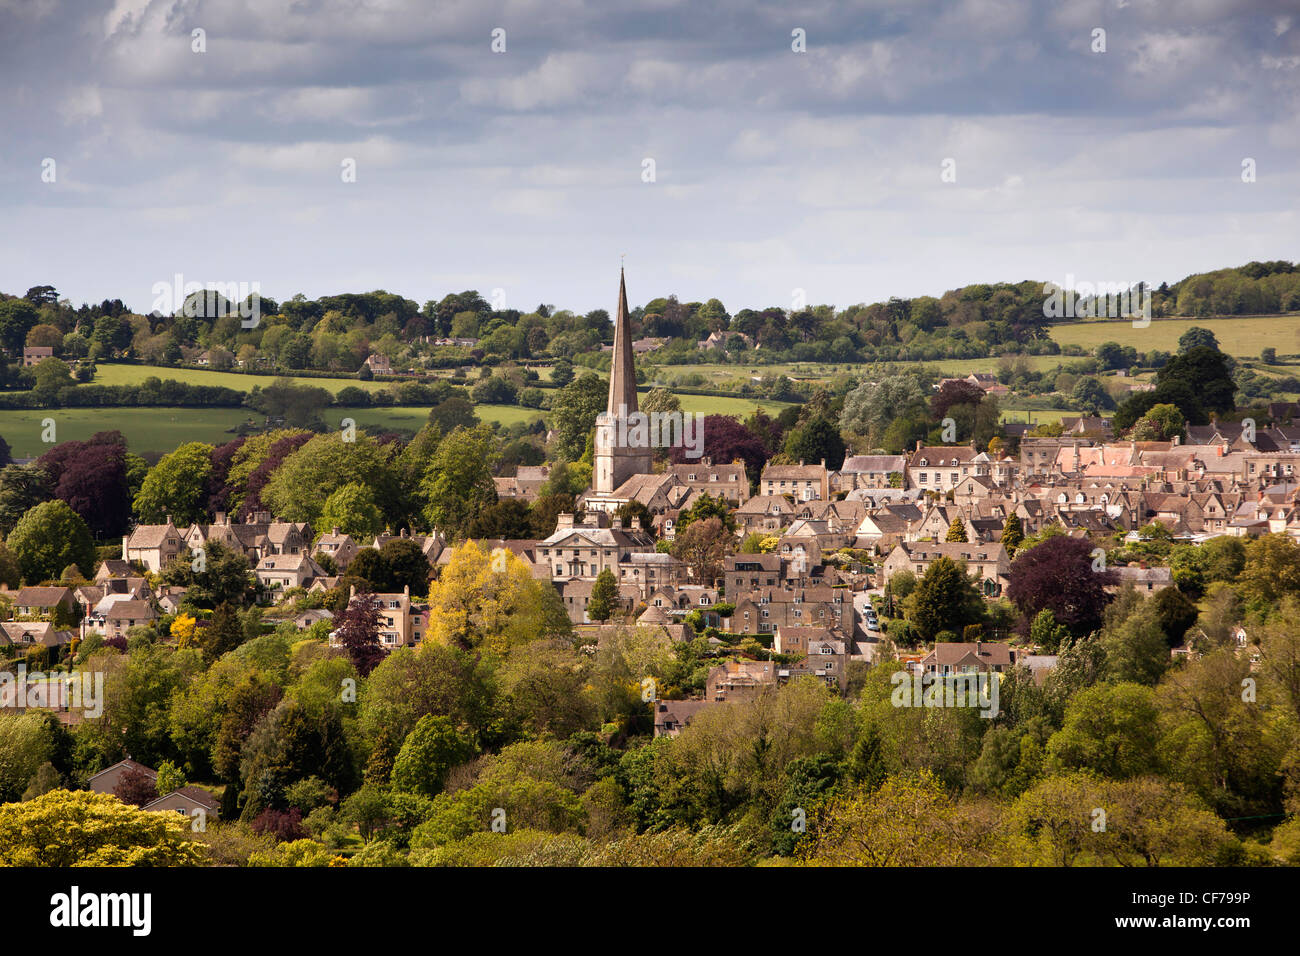 UK, Gloucestershire, Stroud, Painswick from across the valley Stock Photo